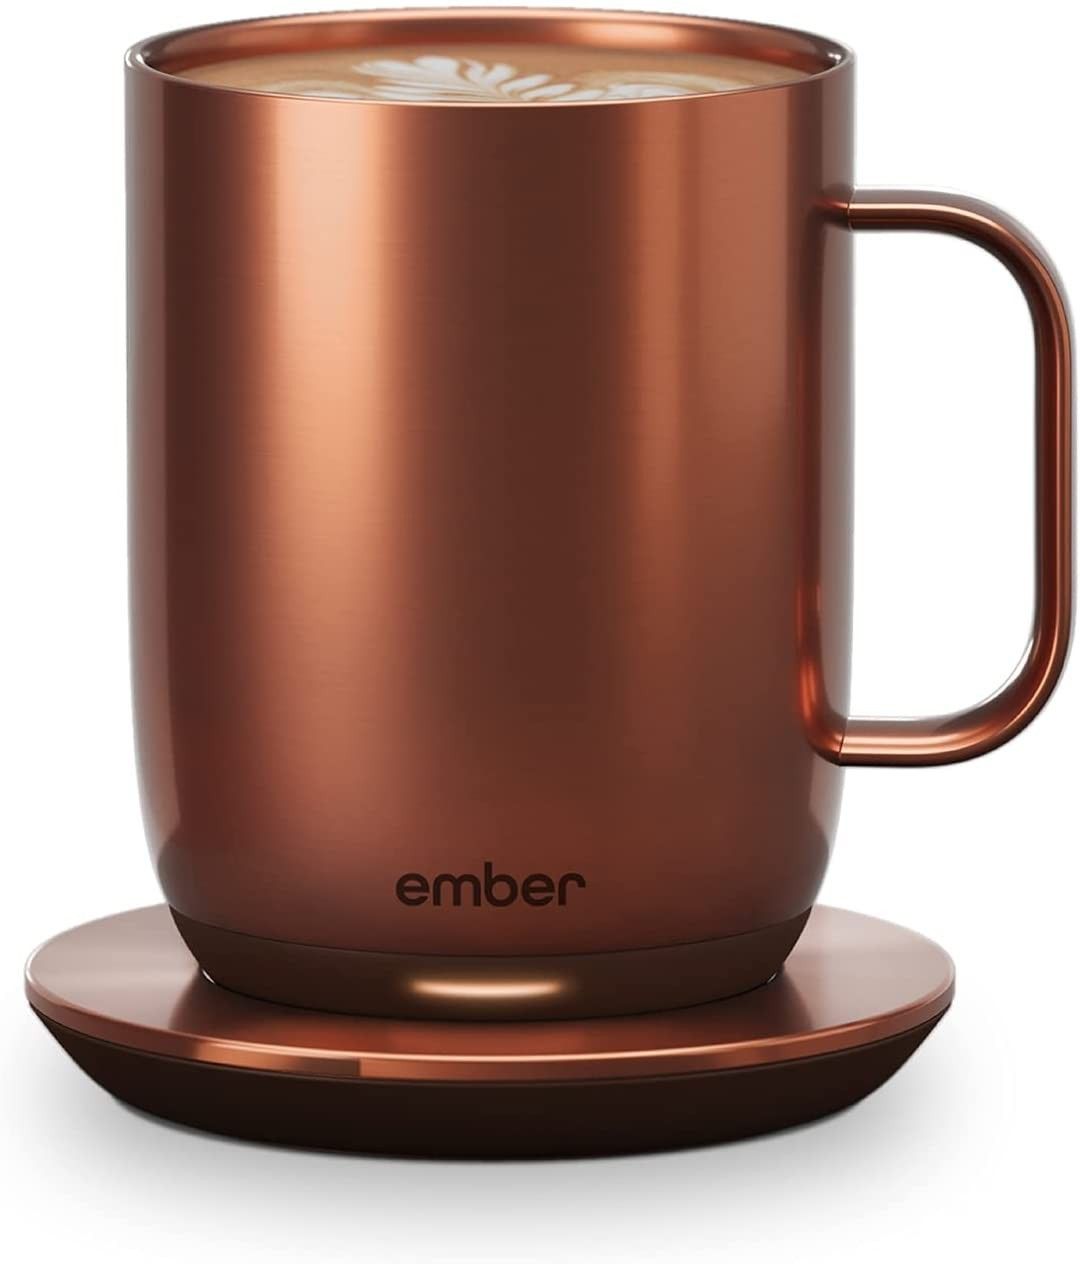 Ember Temperature Control Smart Mug 2, 10 oz, Copper, 1.5-hr Battery Life - App Controlled Heated Co | Amazon (US)